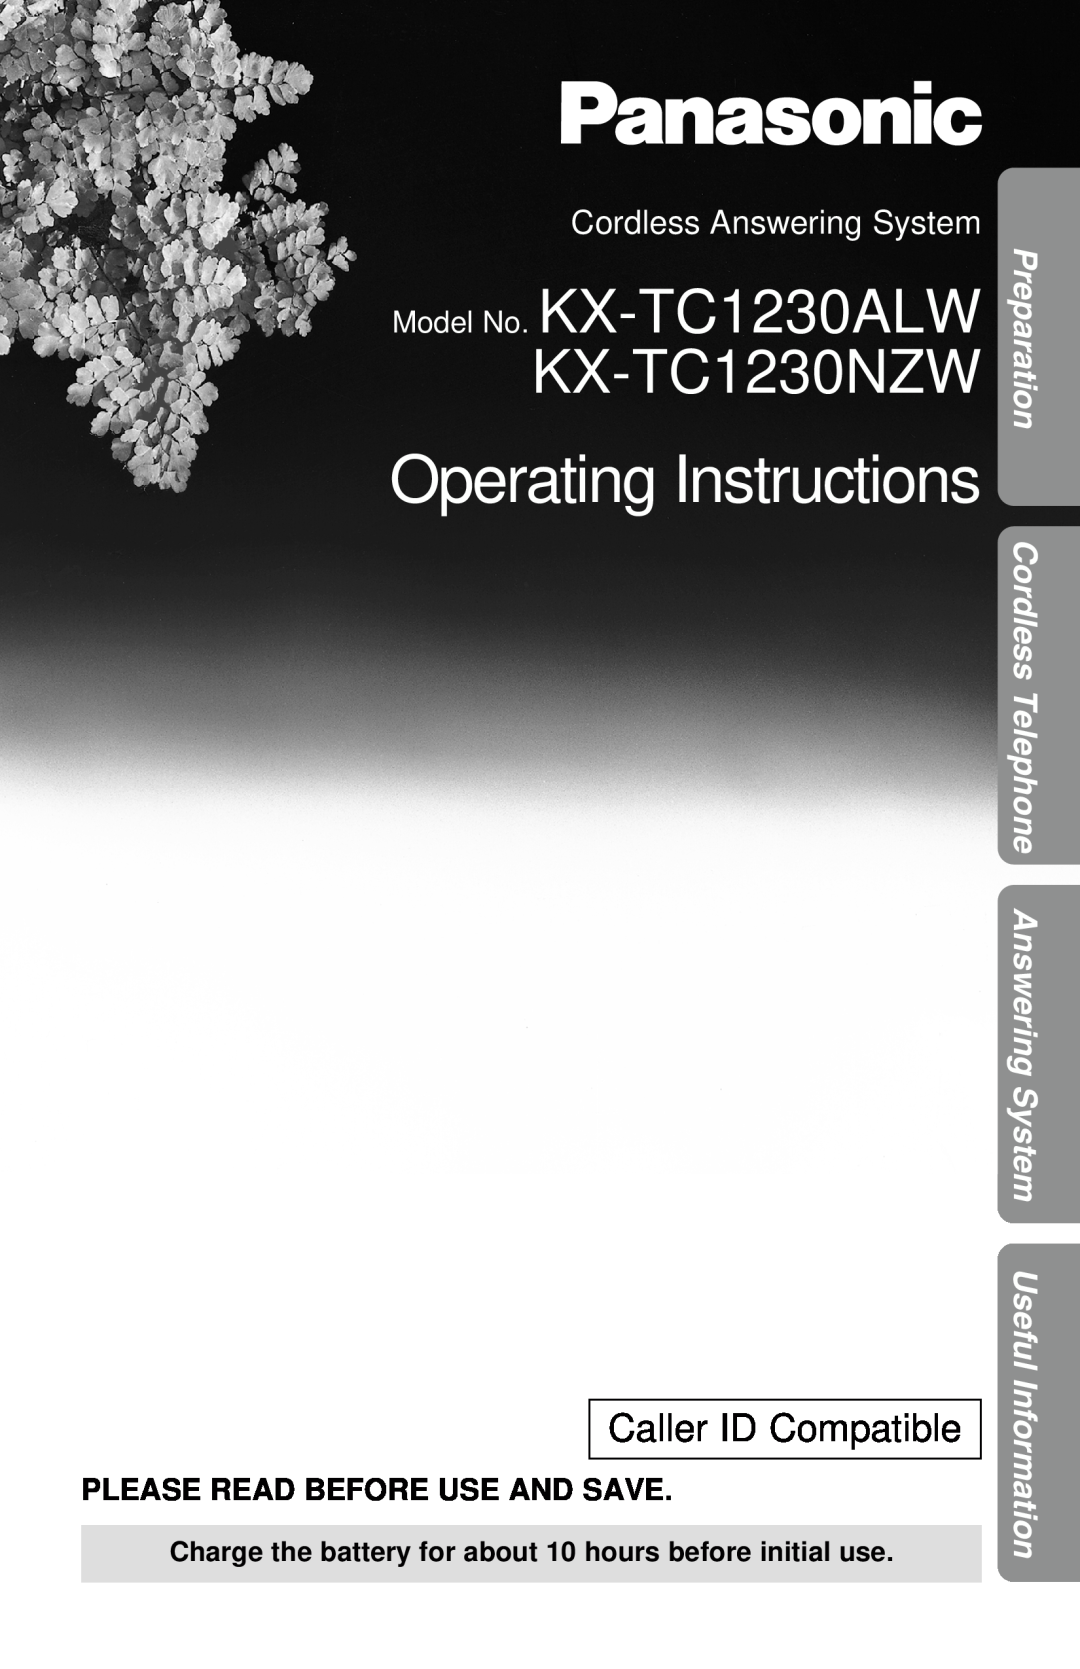 Panasonic KX-TC1230NZW, KX-TC1230ALW operating instructions Charge the battery for about 10 hours before initial use 